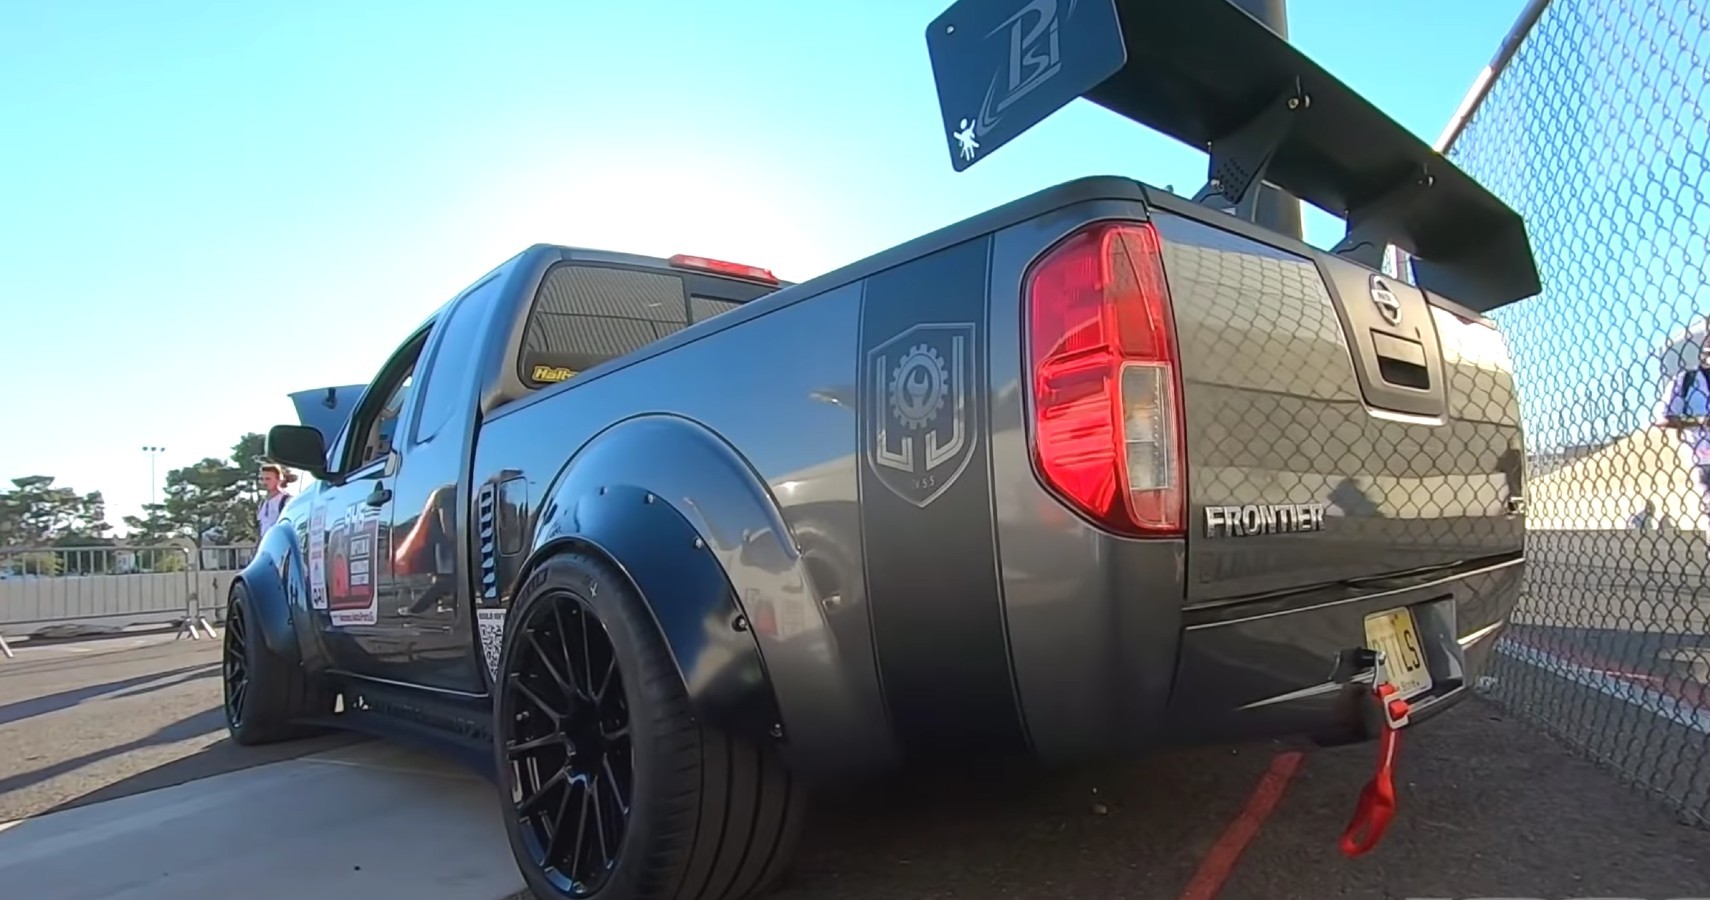 LS-Swapped 700-HP AWD Nissan Frontier Has a Crazy Amount of